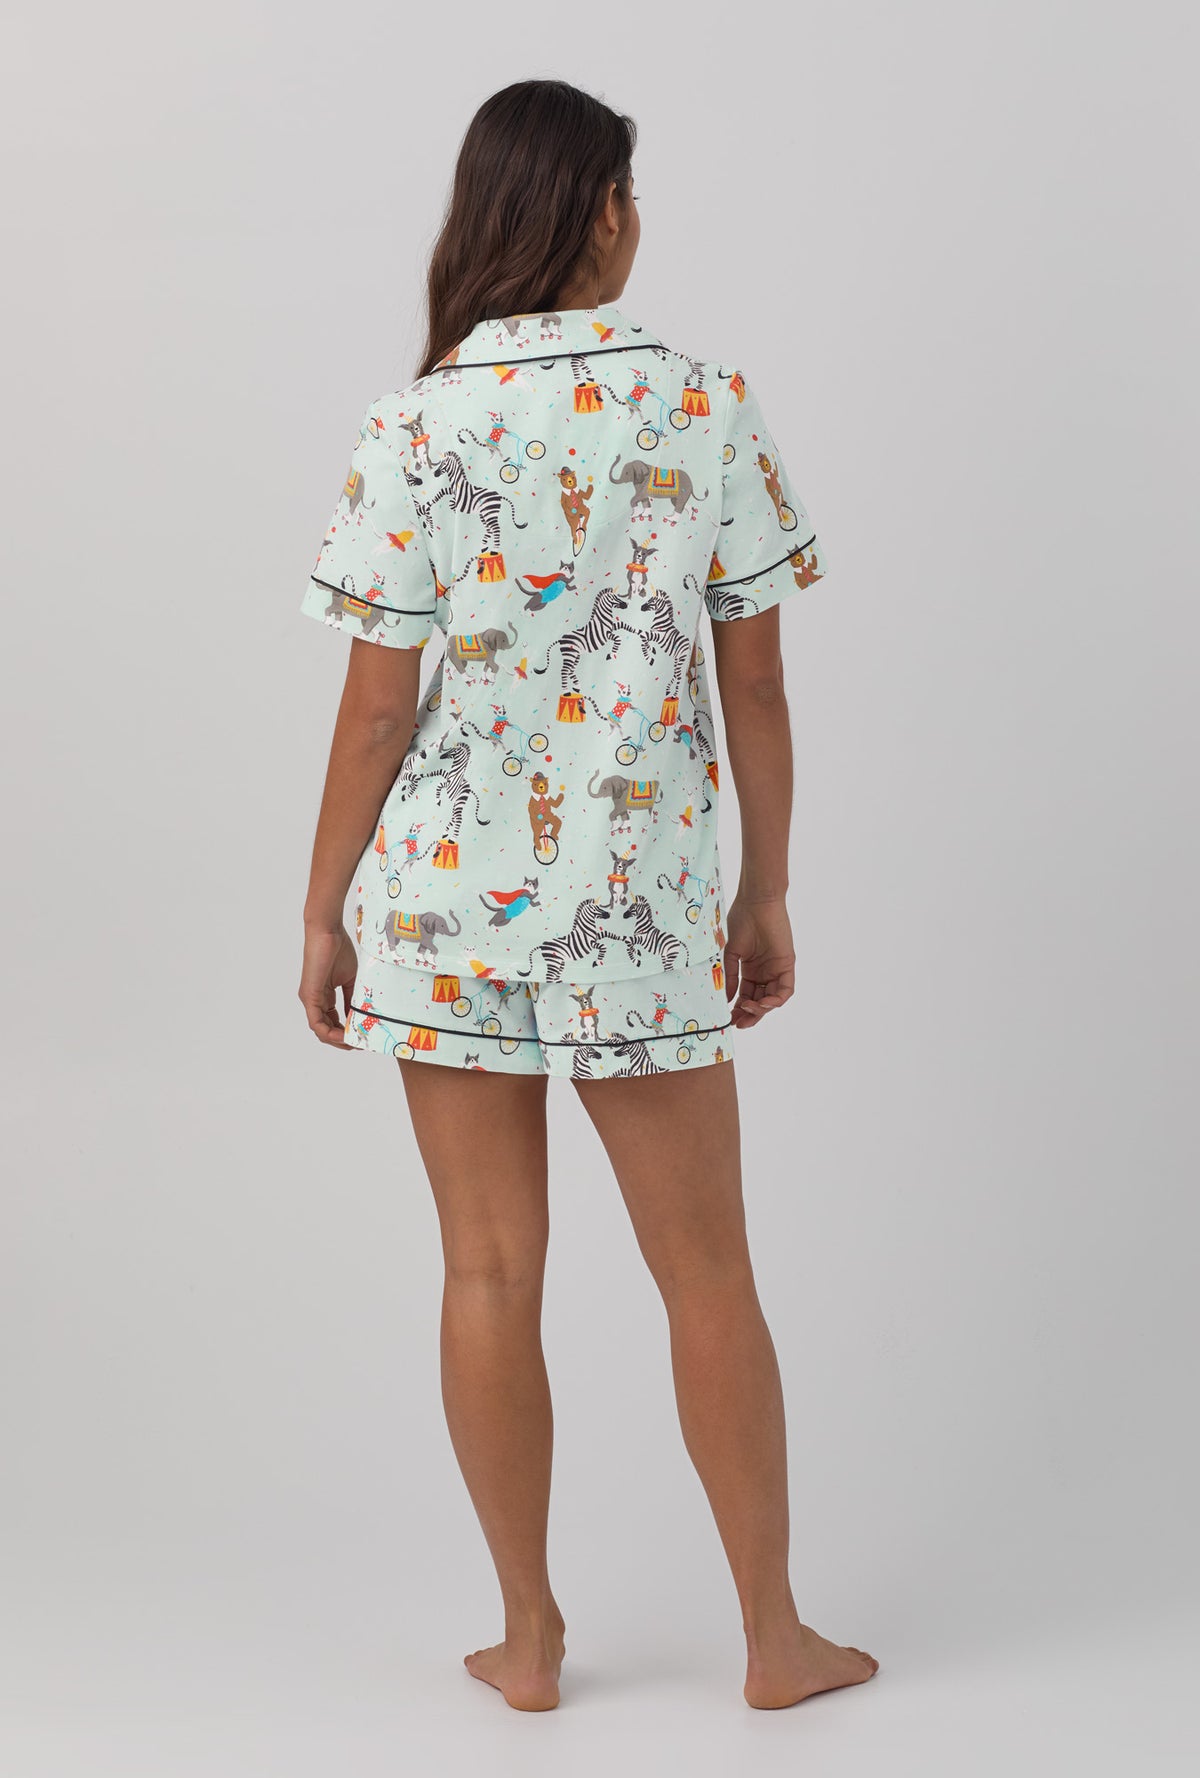 A lady wearing Short Sleeve Classic Shorty Stretch Jersey PJ Set with circus ring print